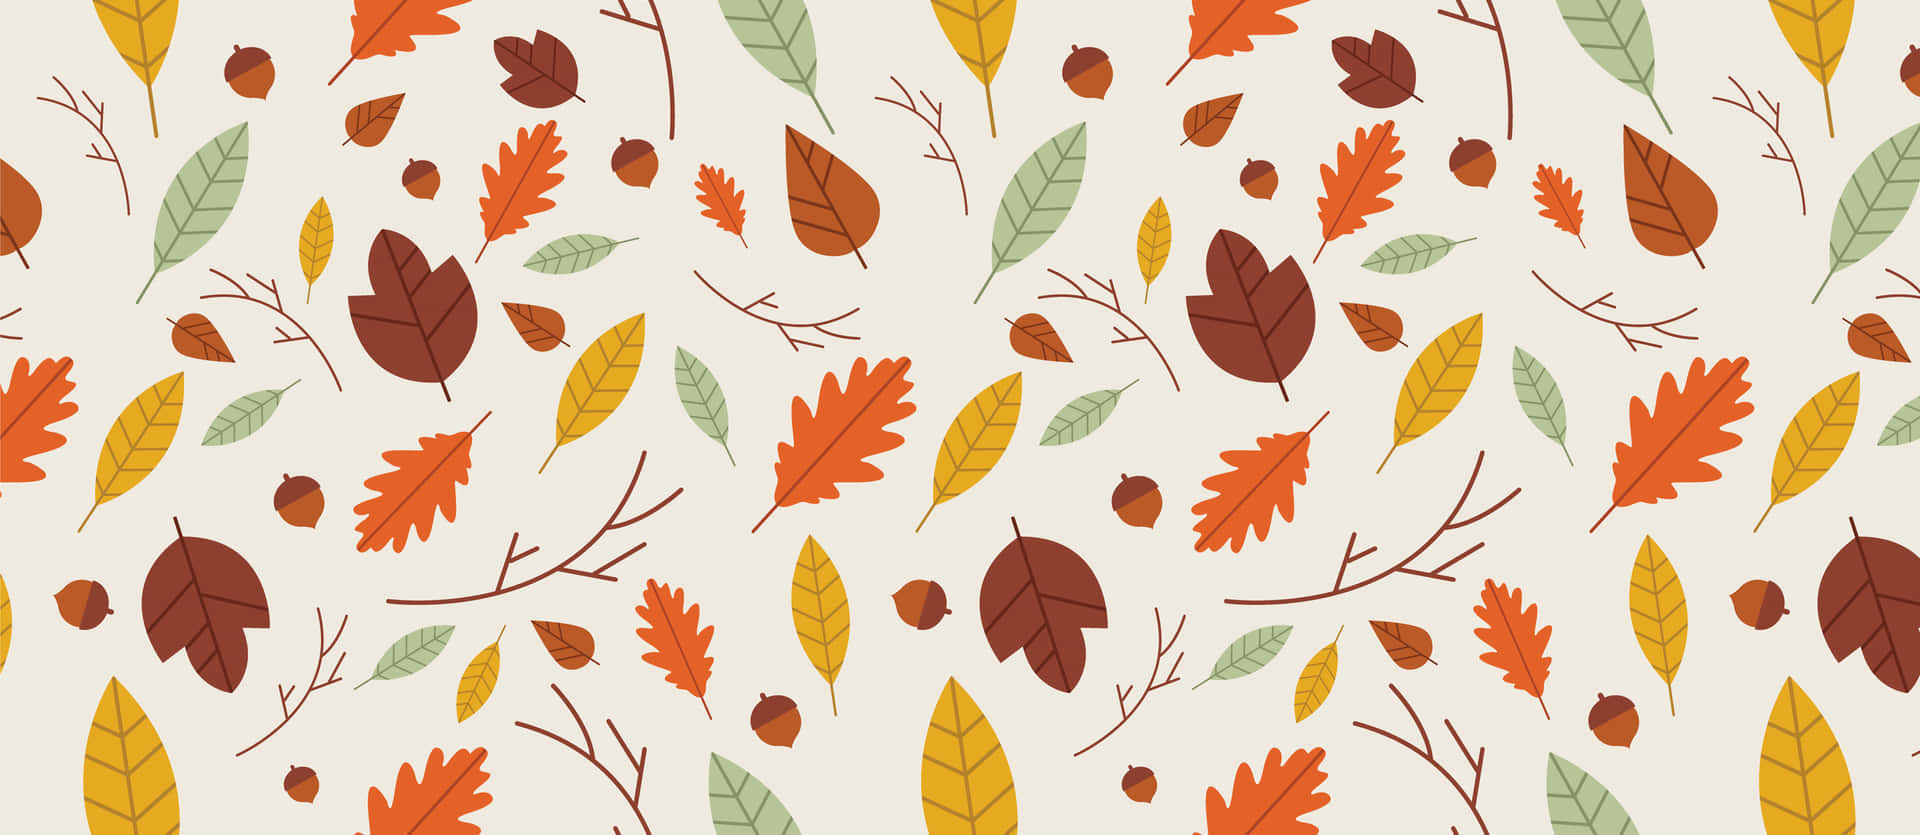 Download Autumn Leaves Pattern On A White Background | Wallpapers.com